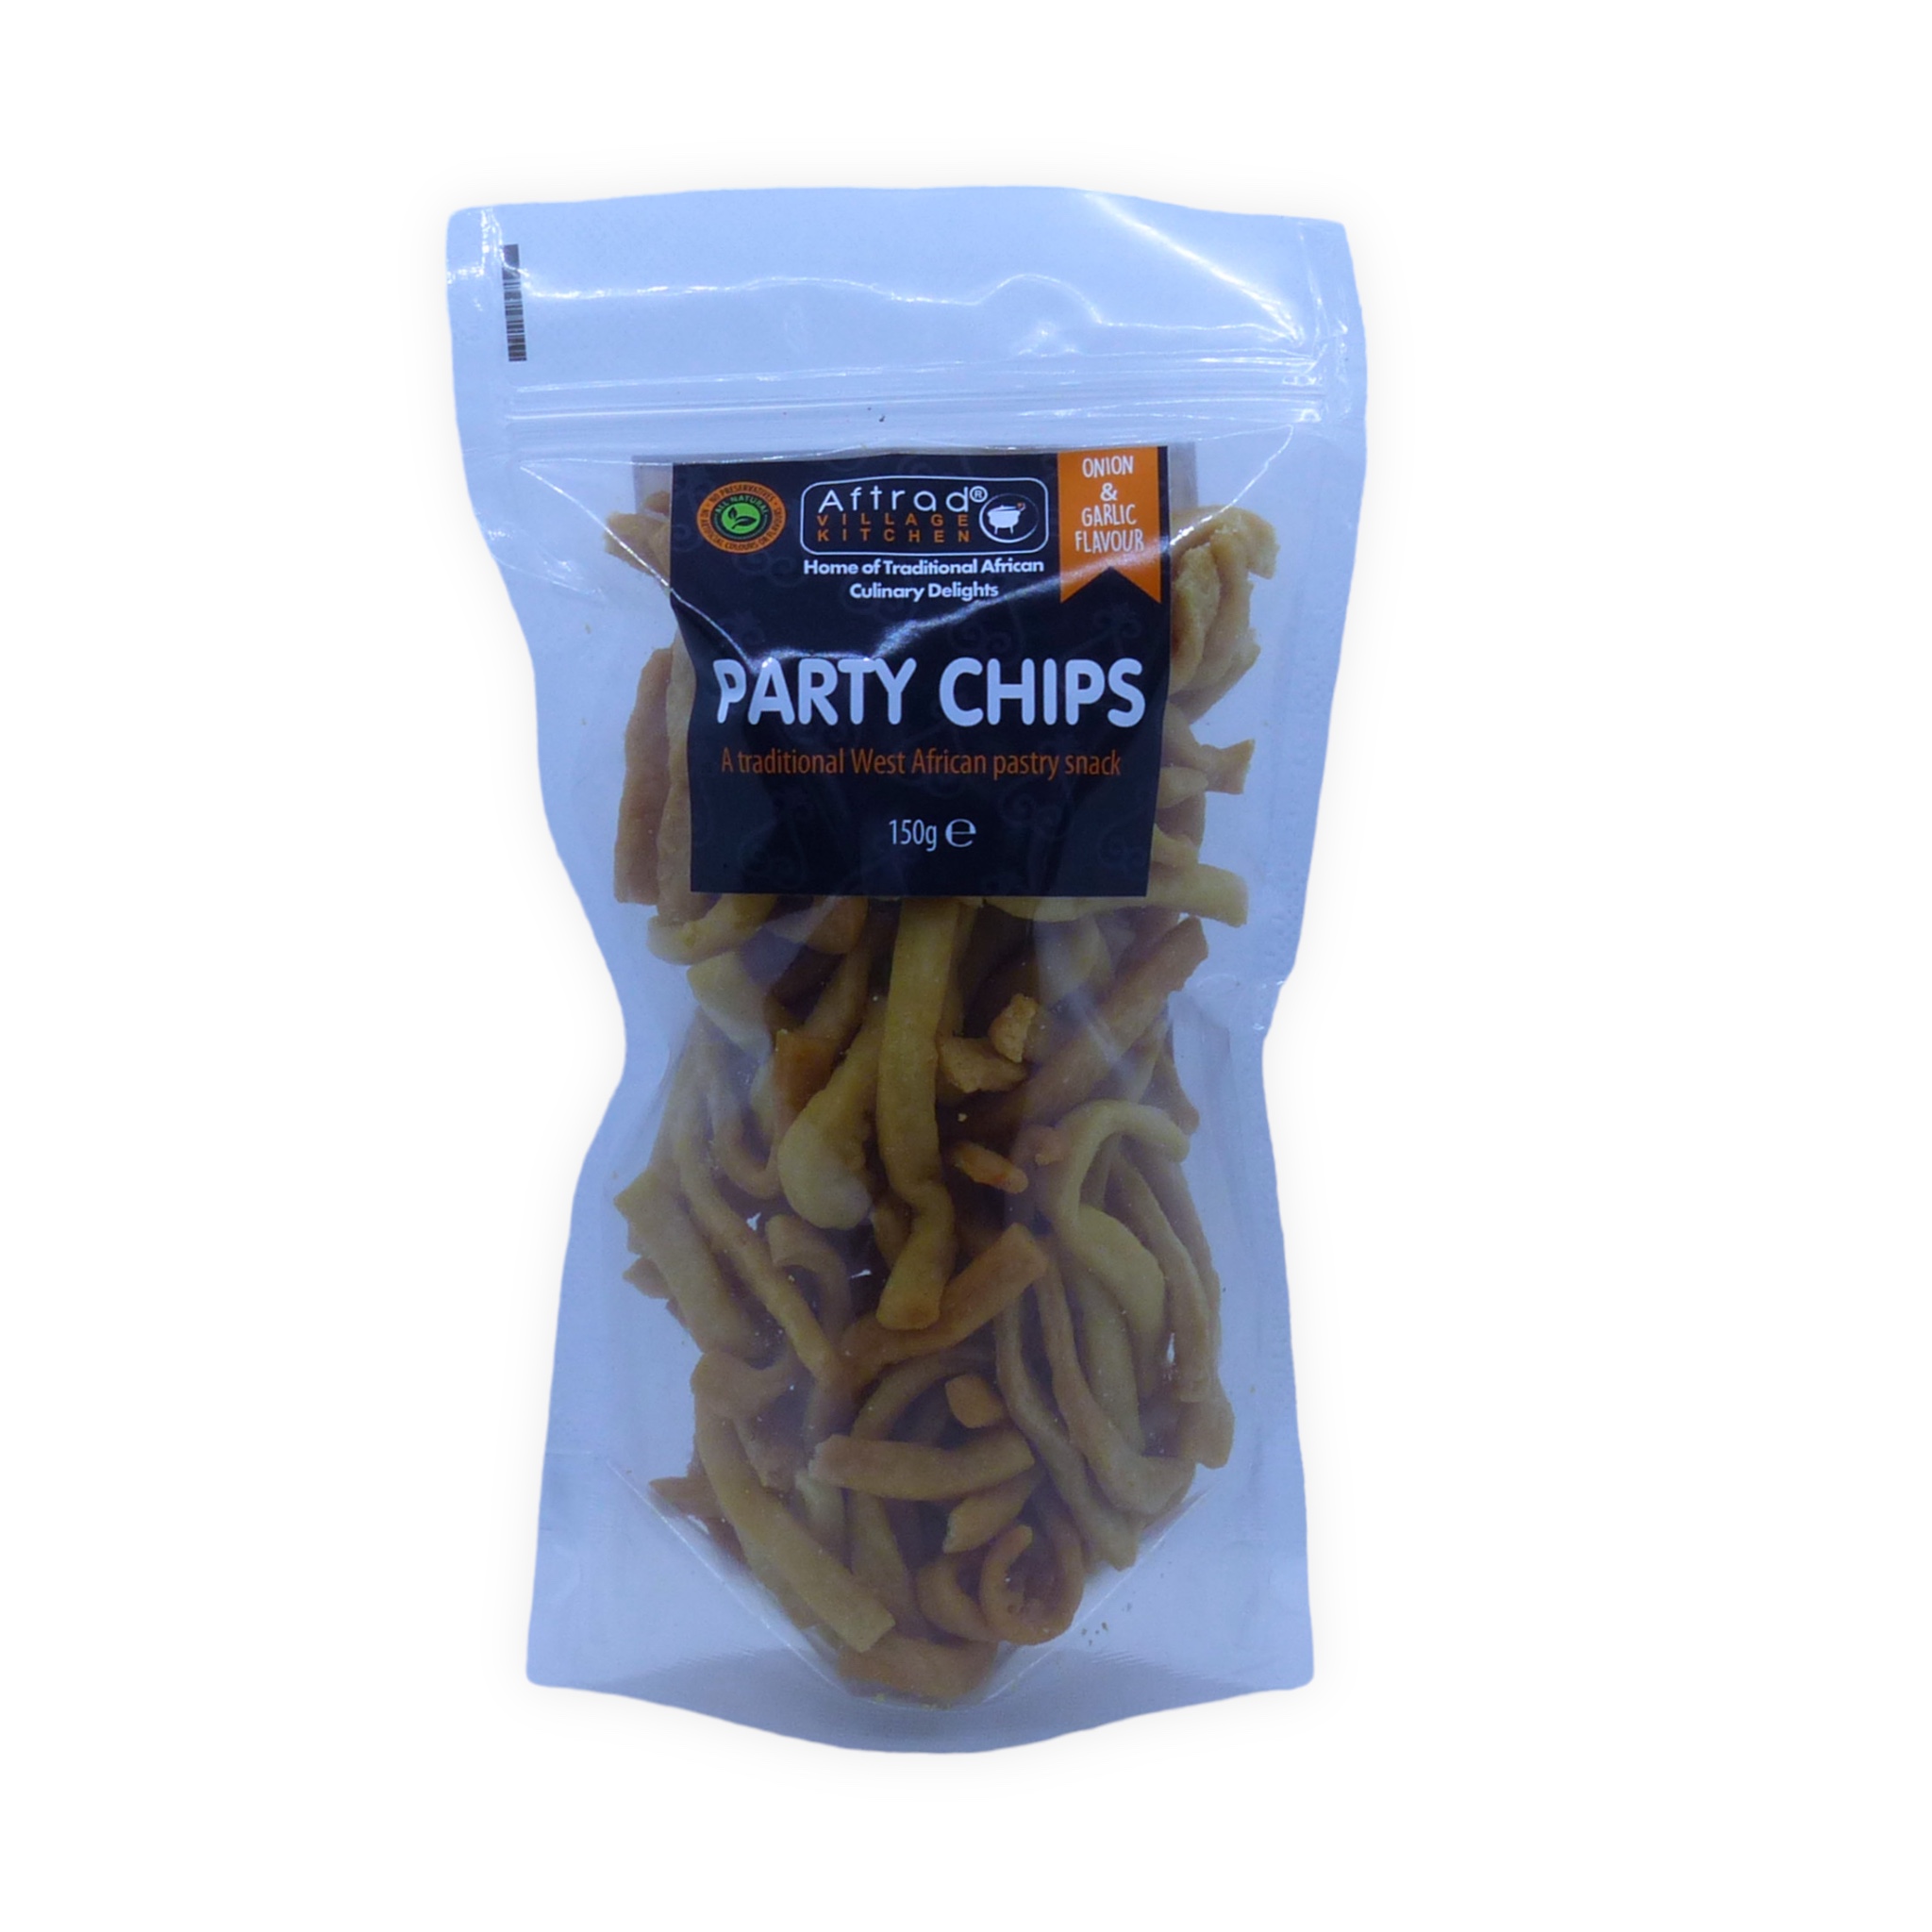 Party Chips